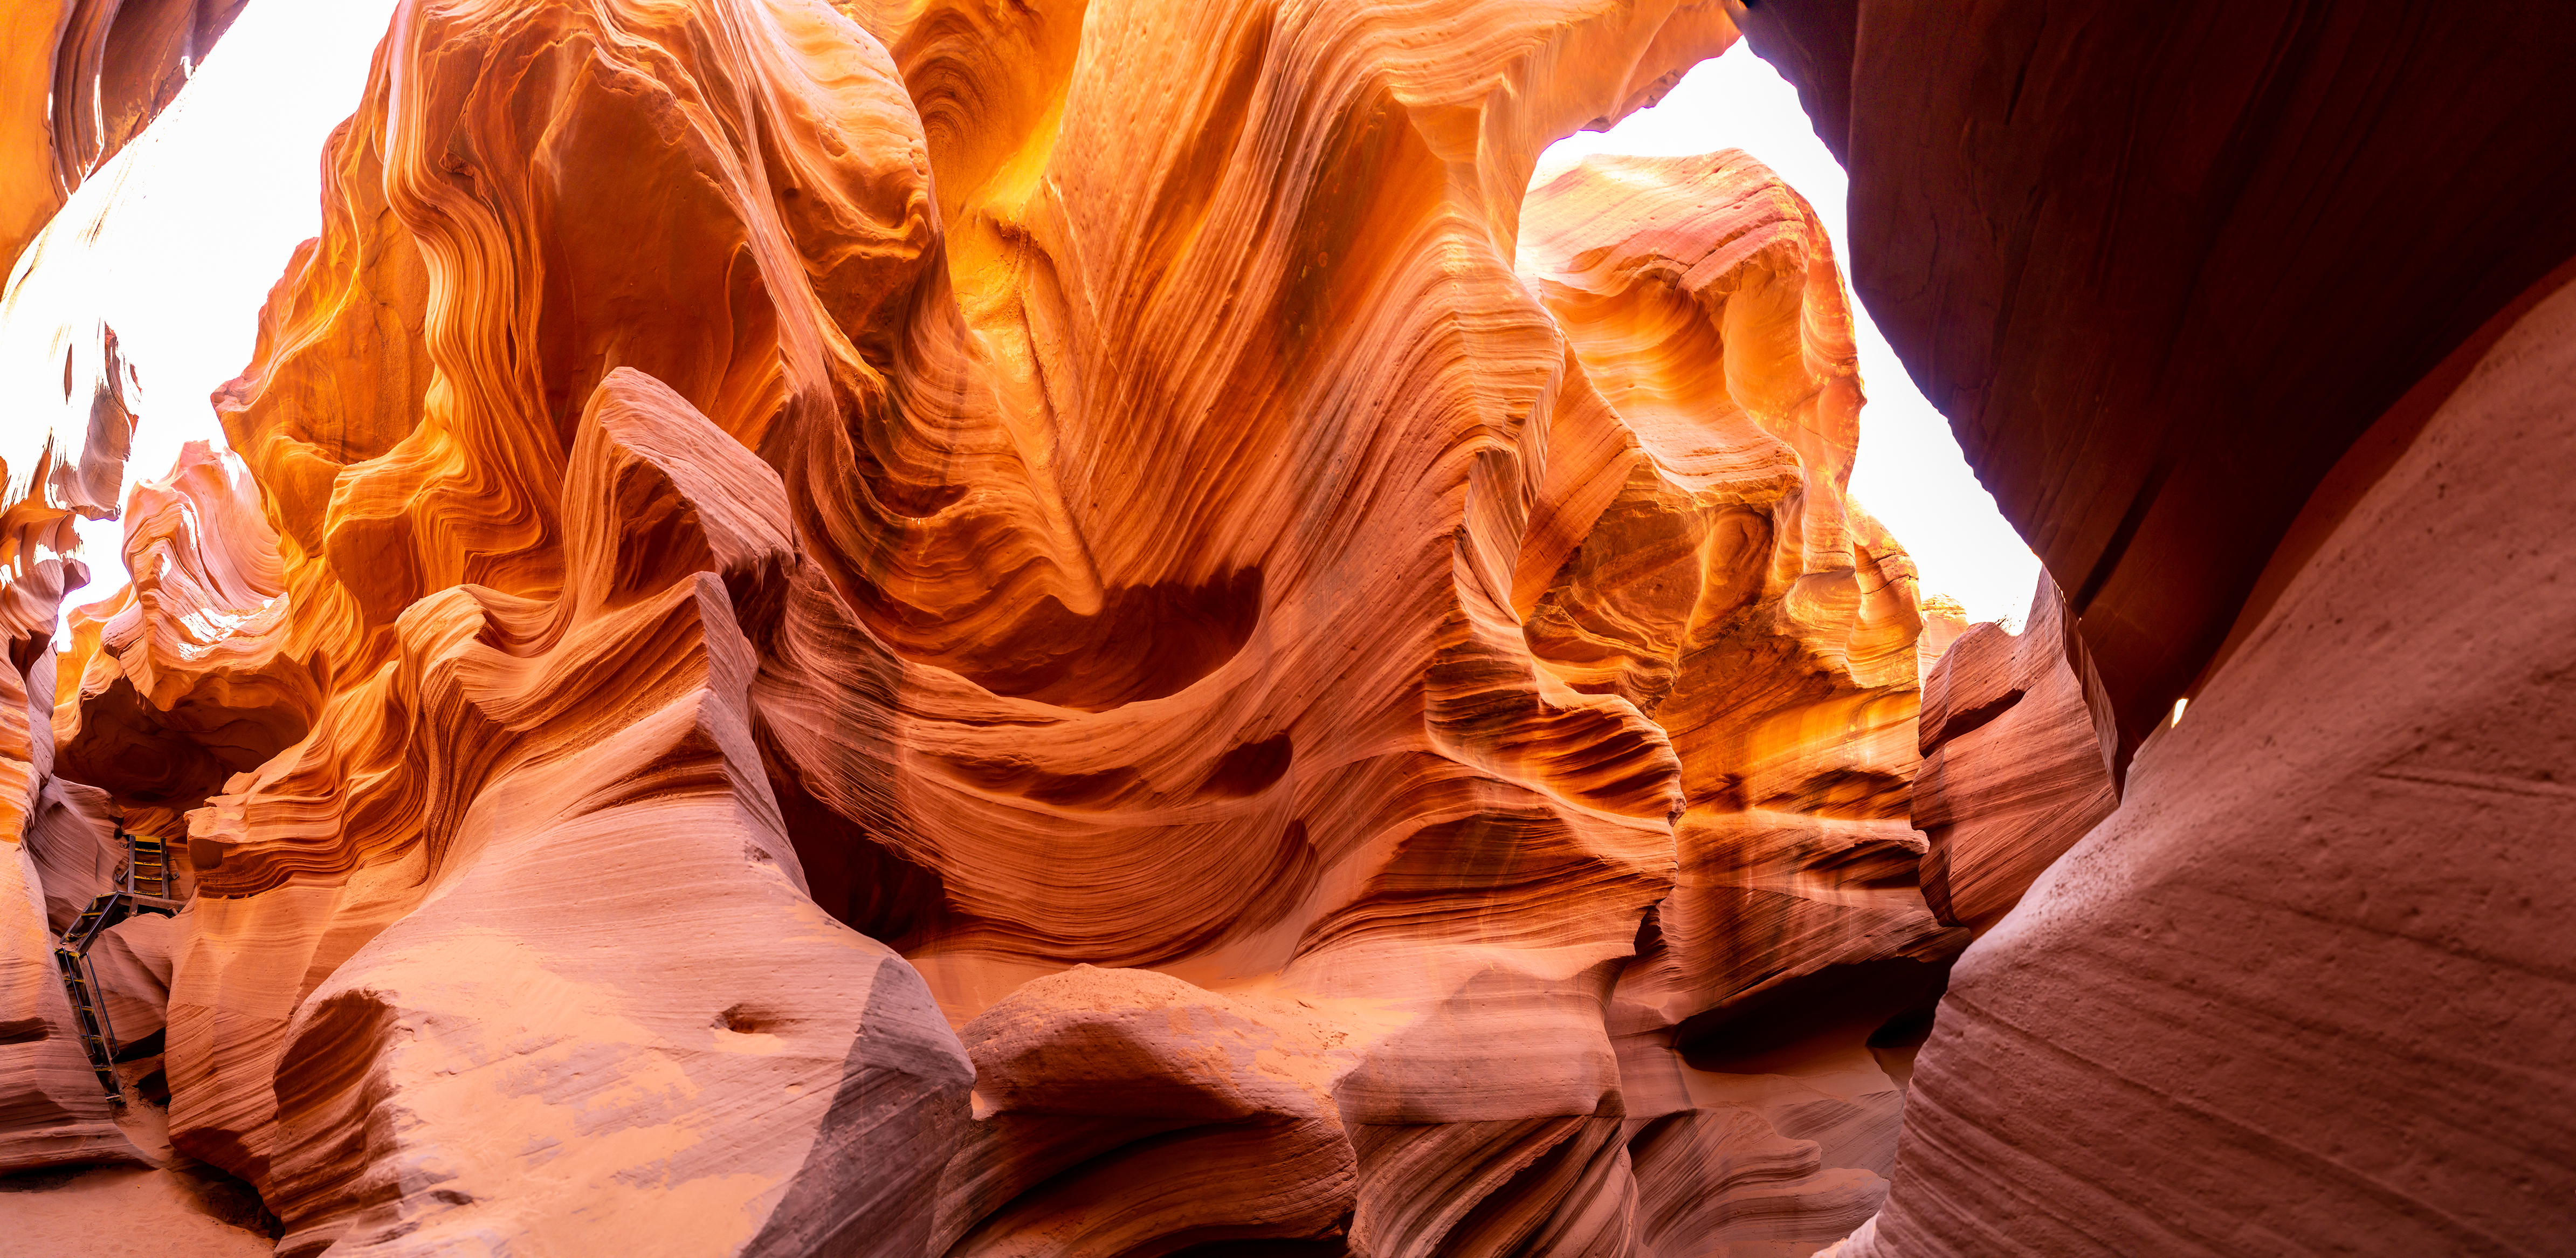 Best Places to See During a Family Vacation in Arizona - Antelope Canyon